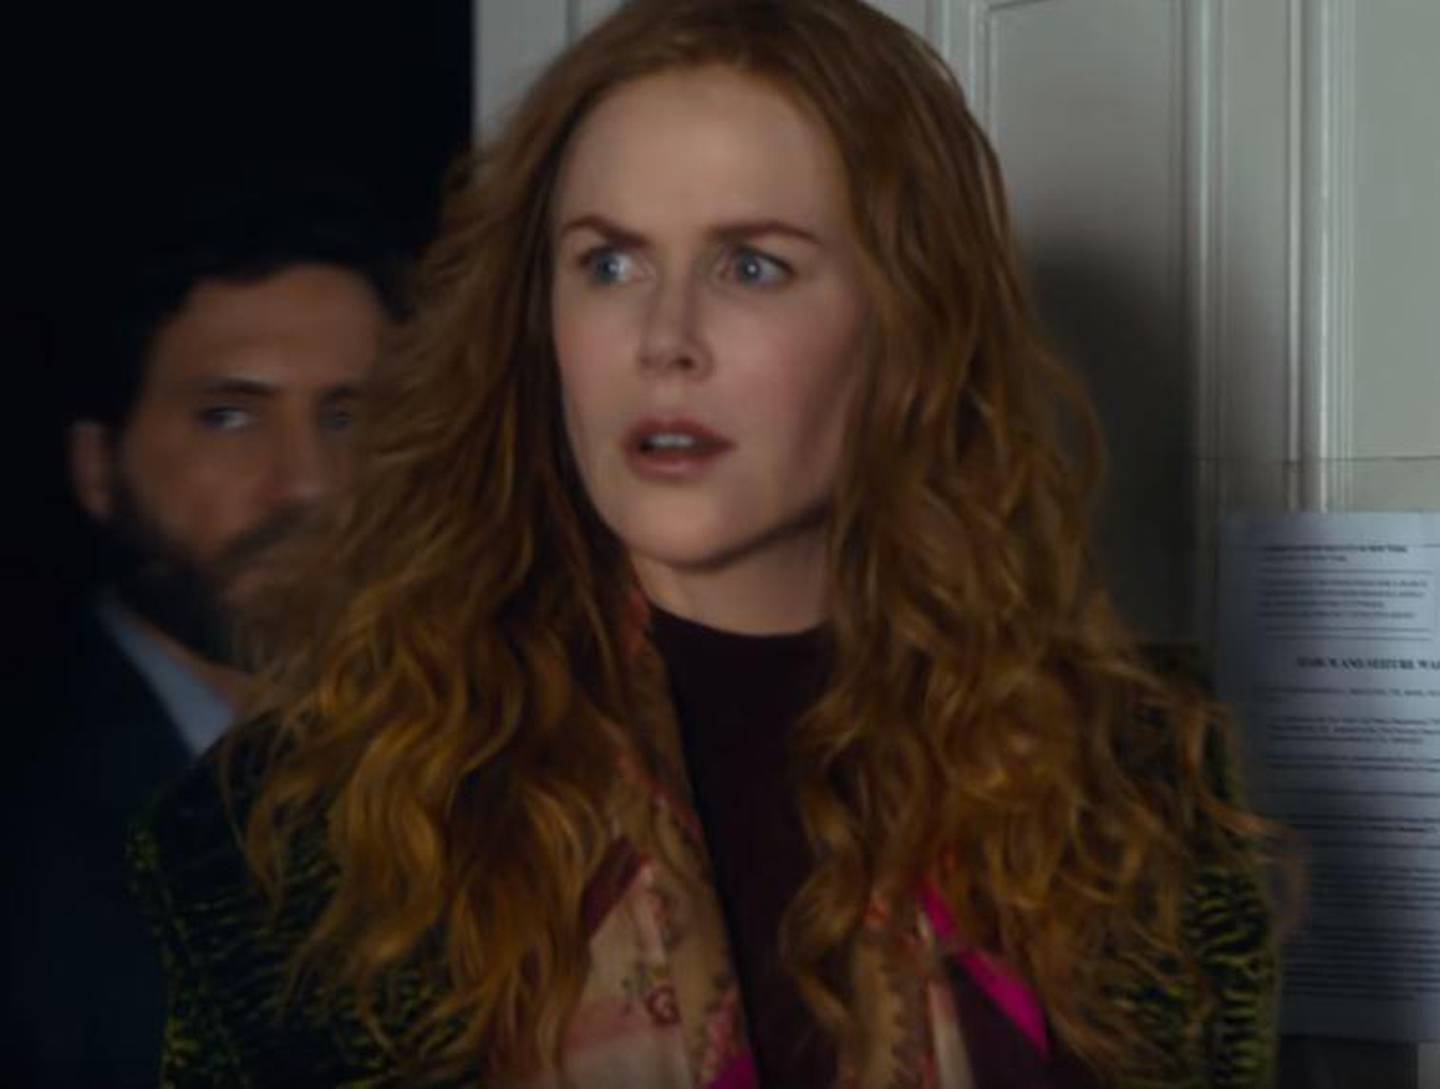 Nicole Kidman has gone back to her roots, showing off curly red hair in 'The Undoing' 